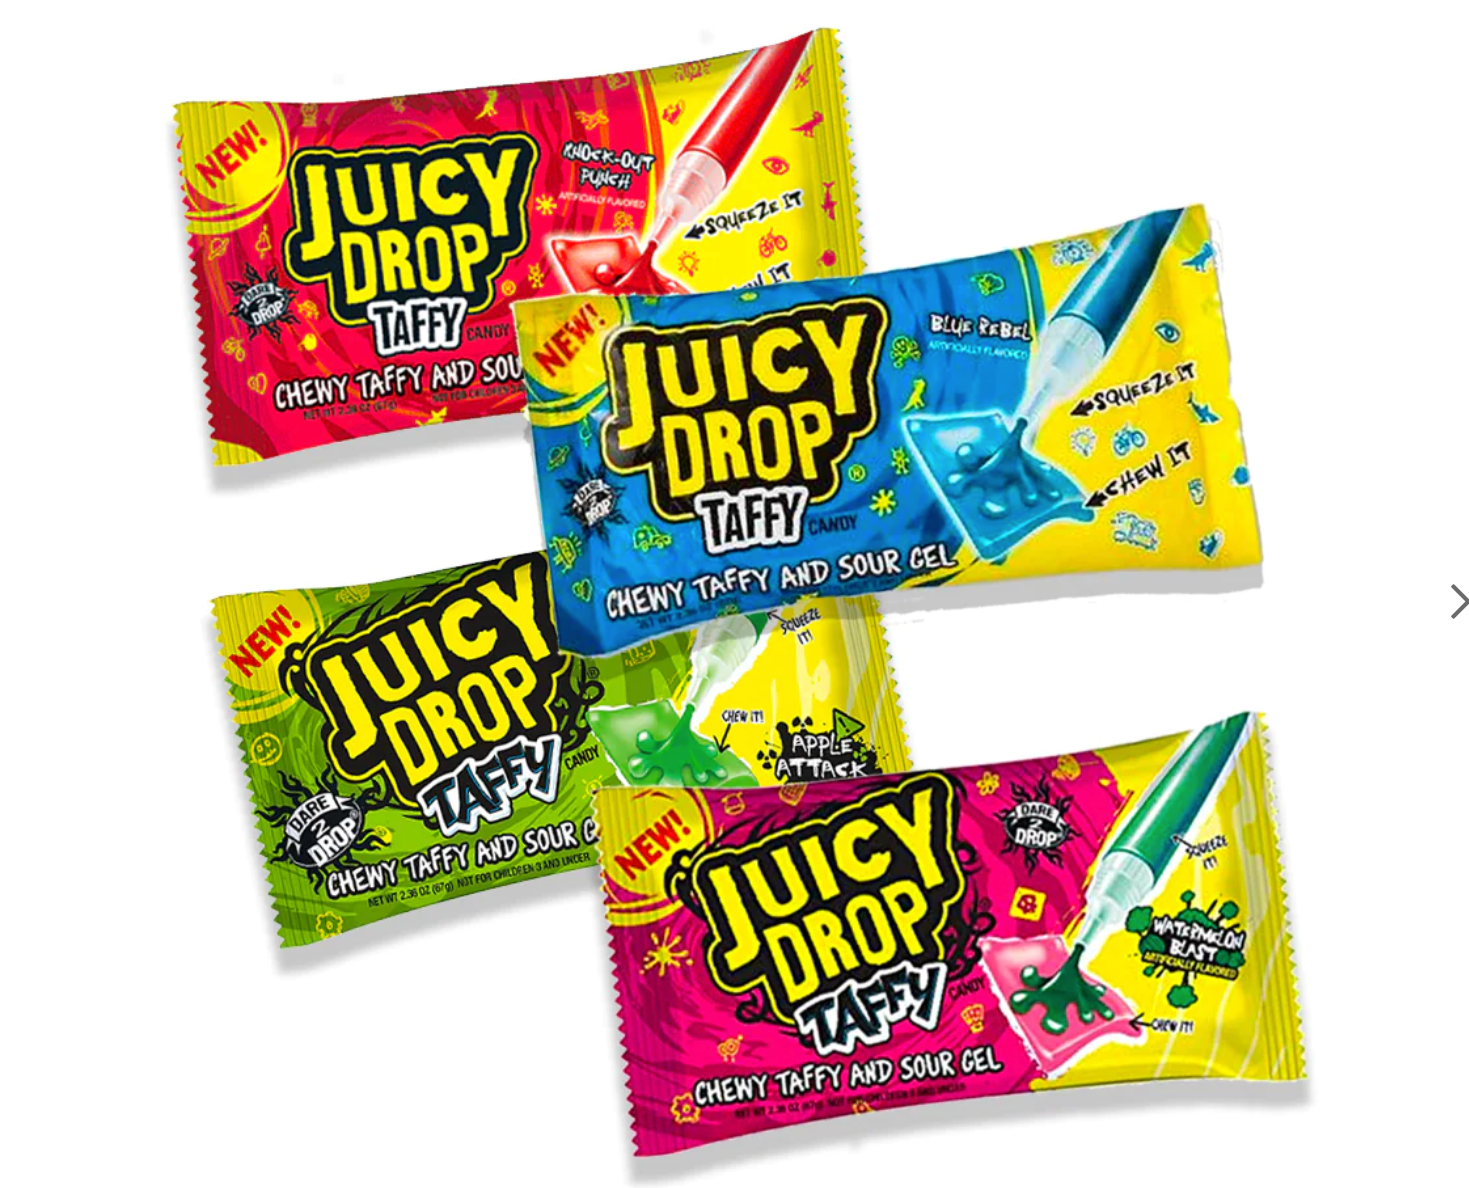 Topps - Juicy Drop Taffy and Sour Gel - Assorted Flavours - 26g